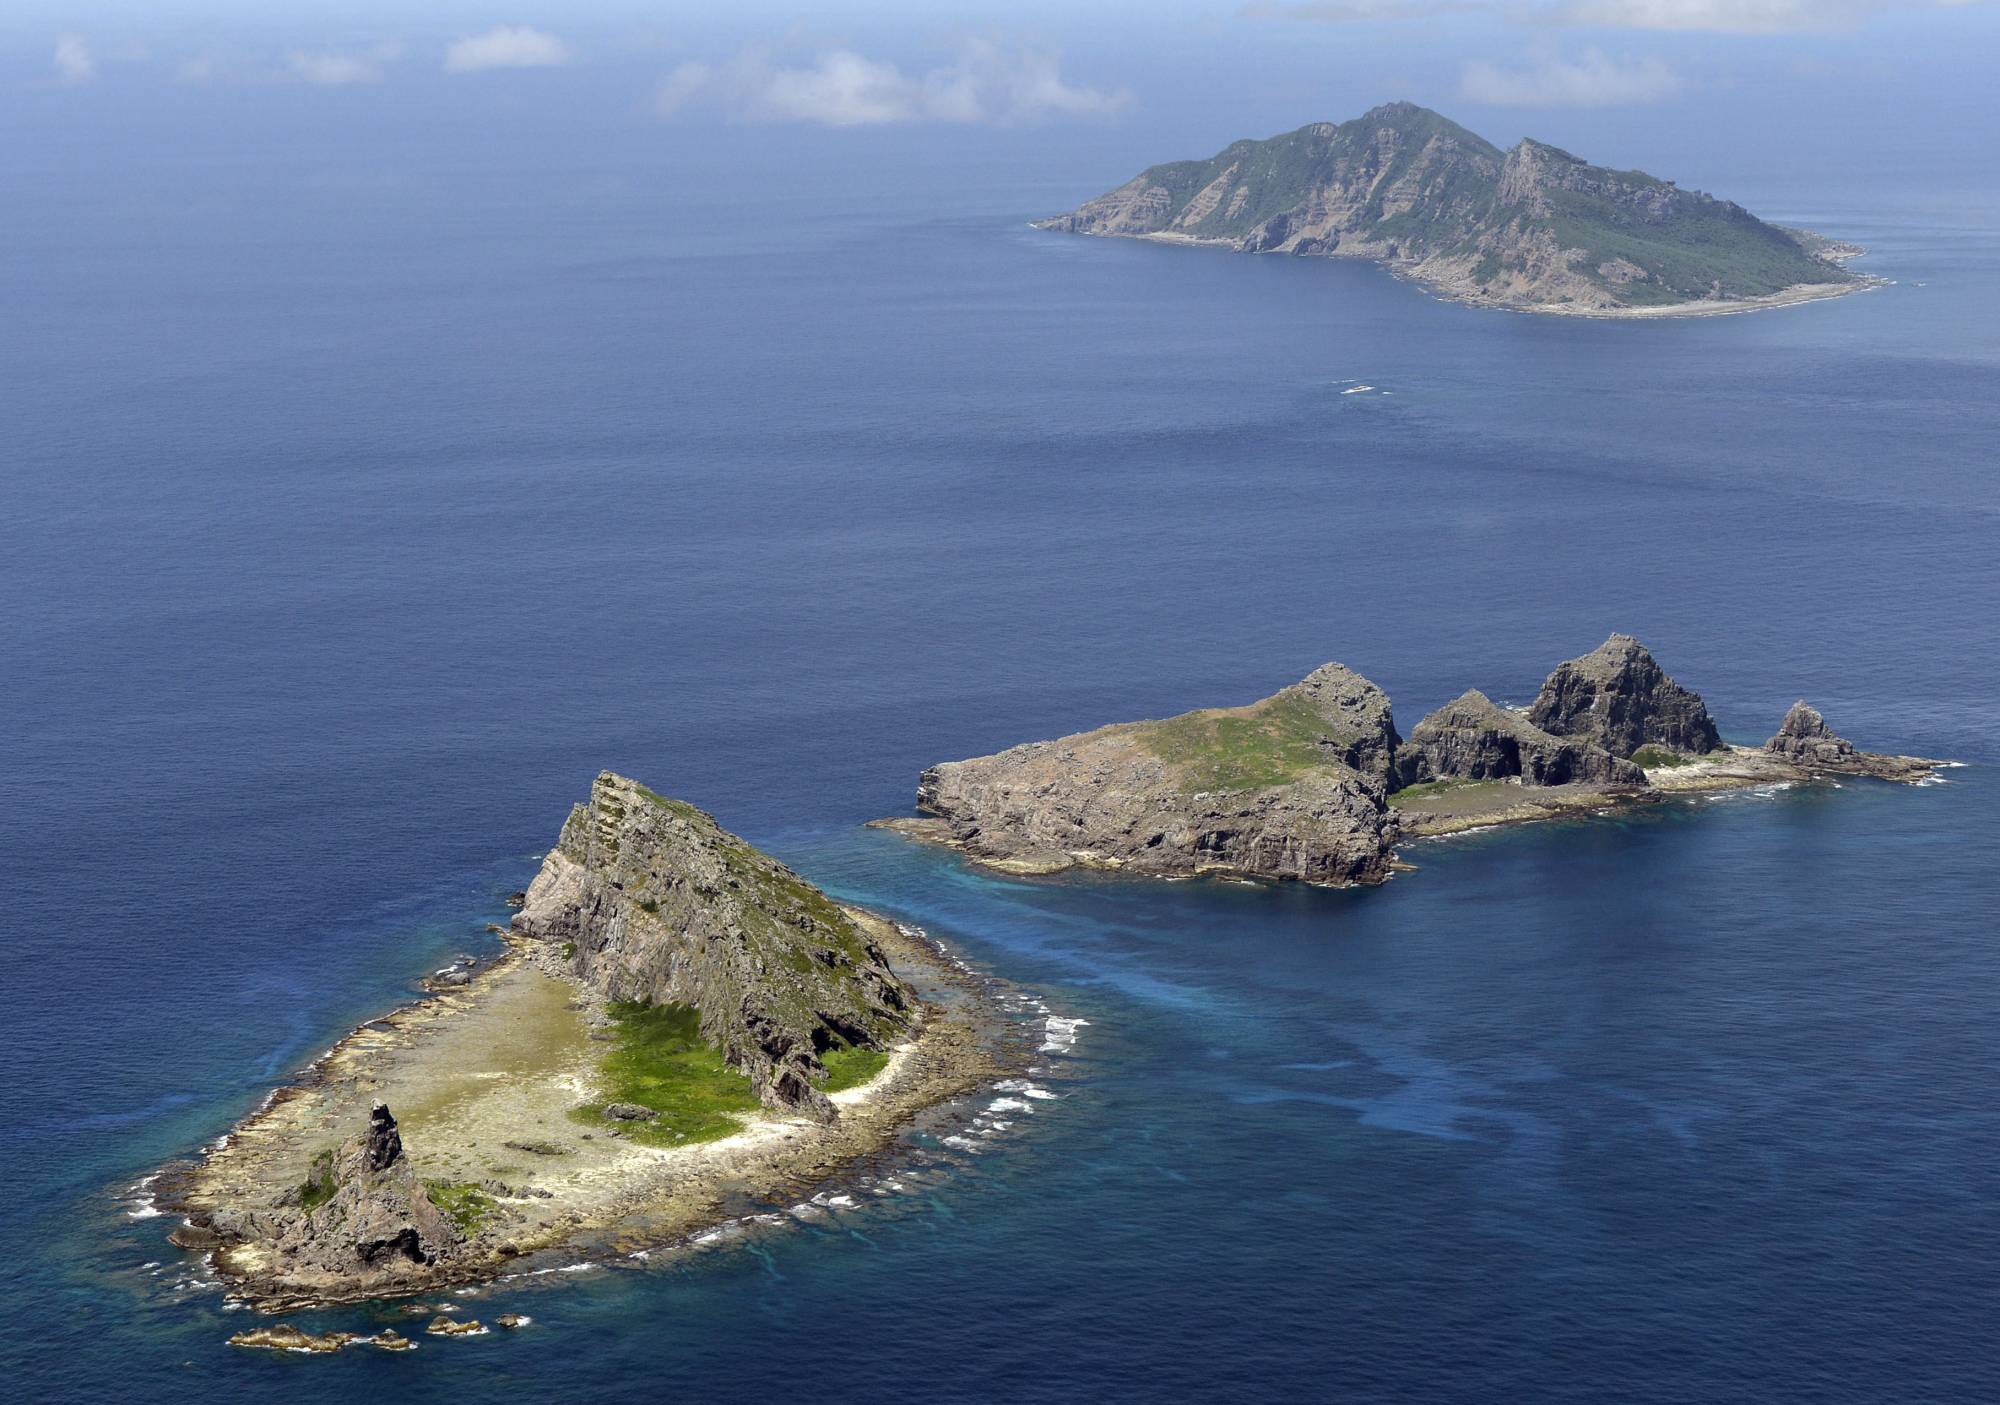 The territorial dispute over the Senkaku Islands has evolved significantly since China lodged its claim in 1971. | KYODO